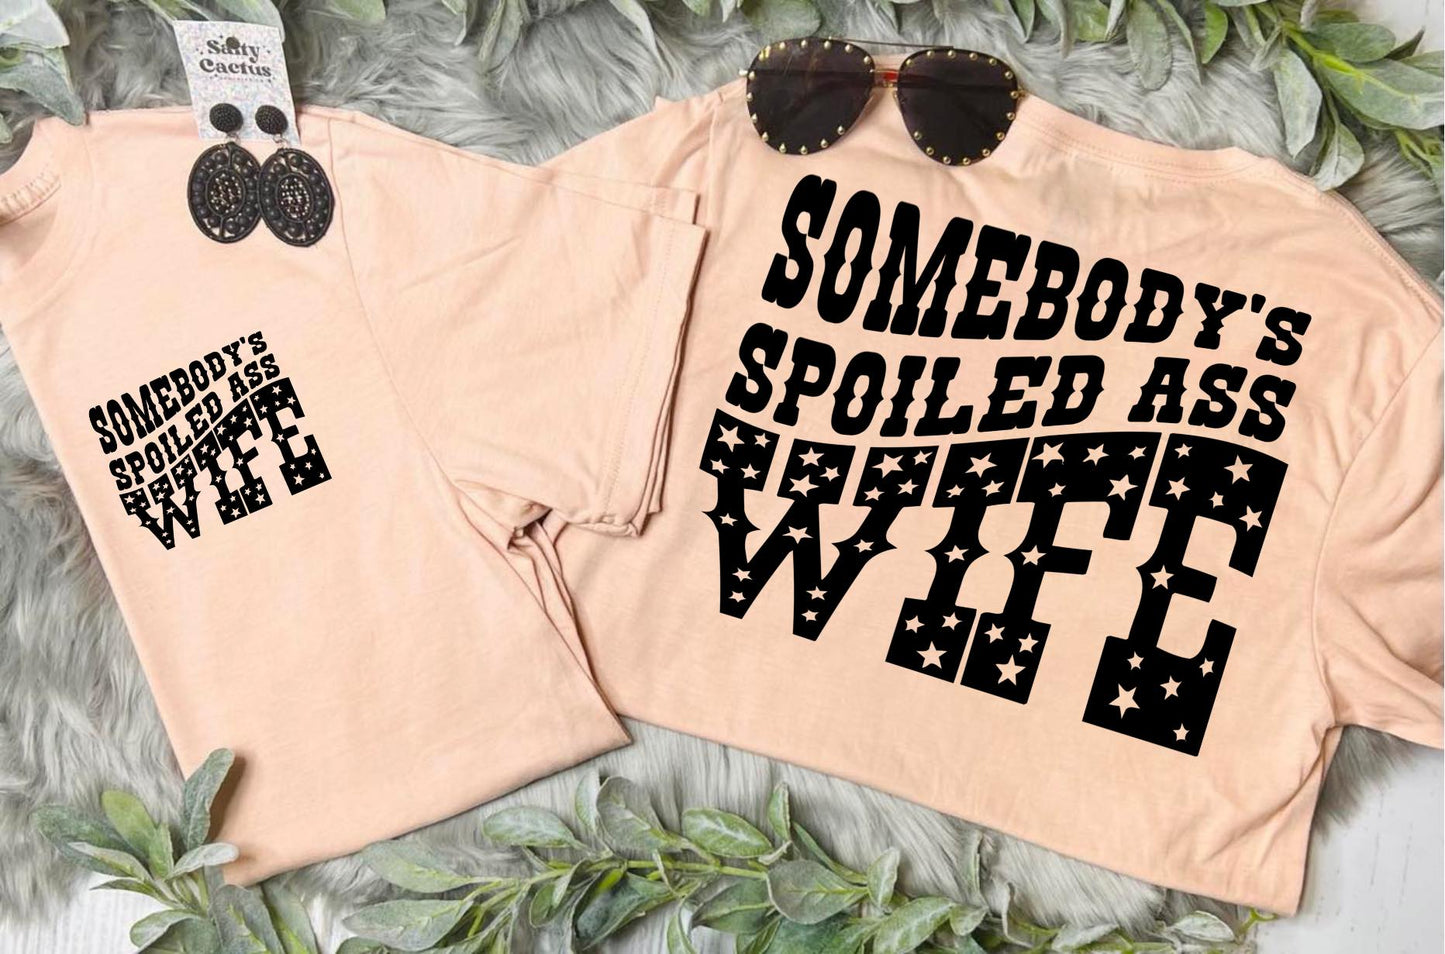 Stars Somebodys Spoiled Ass Wife Peach Tee